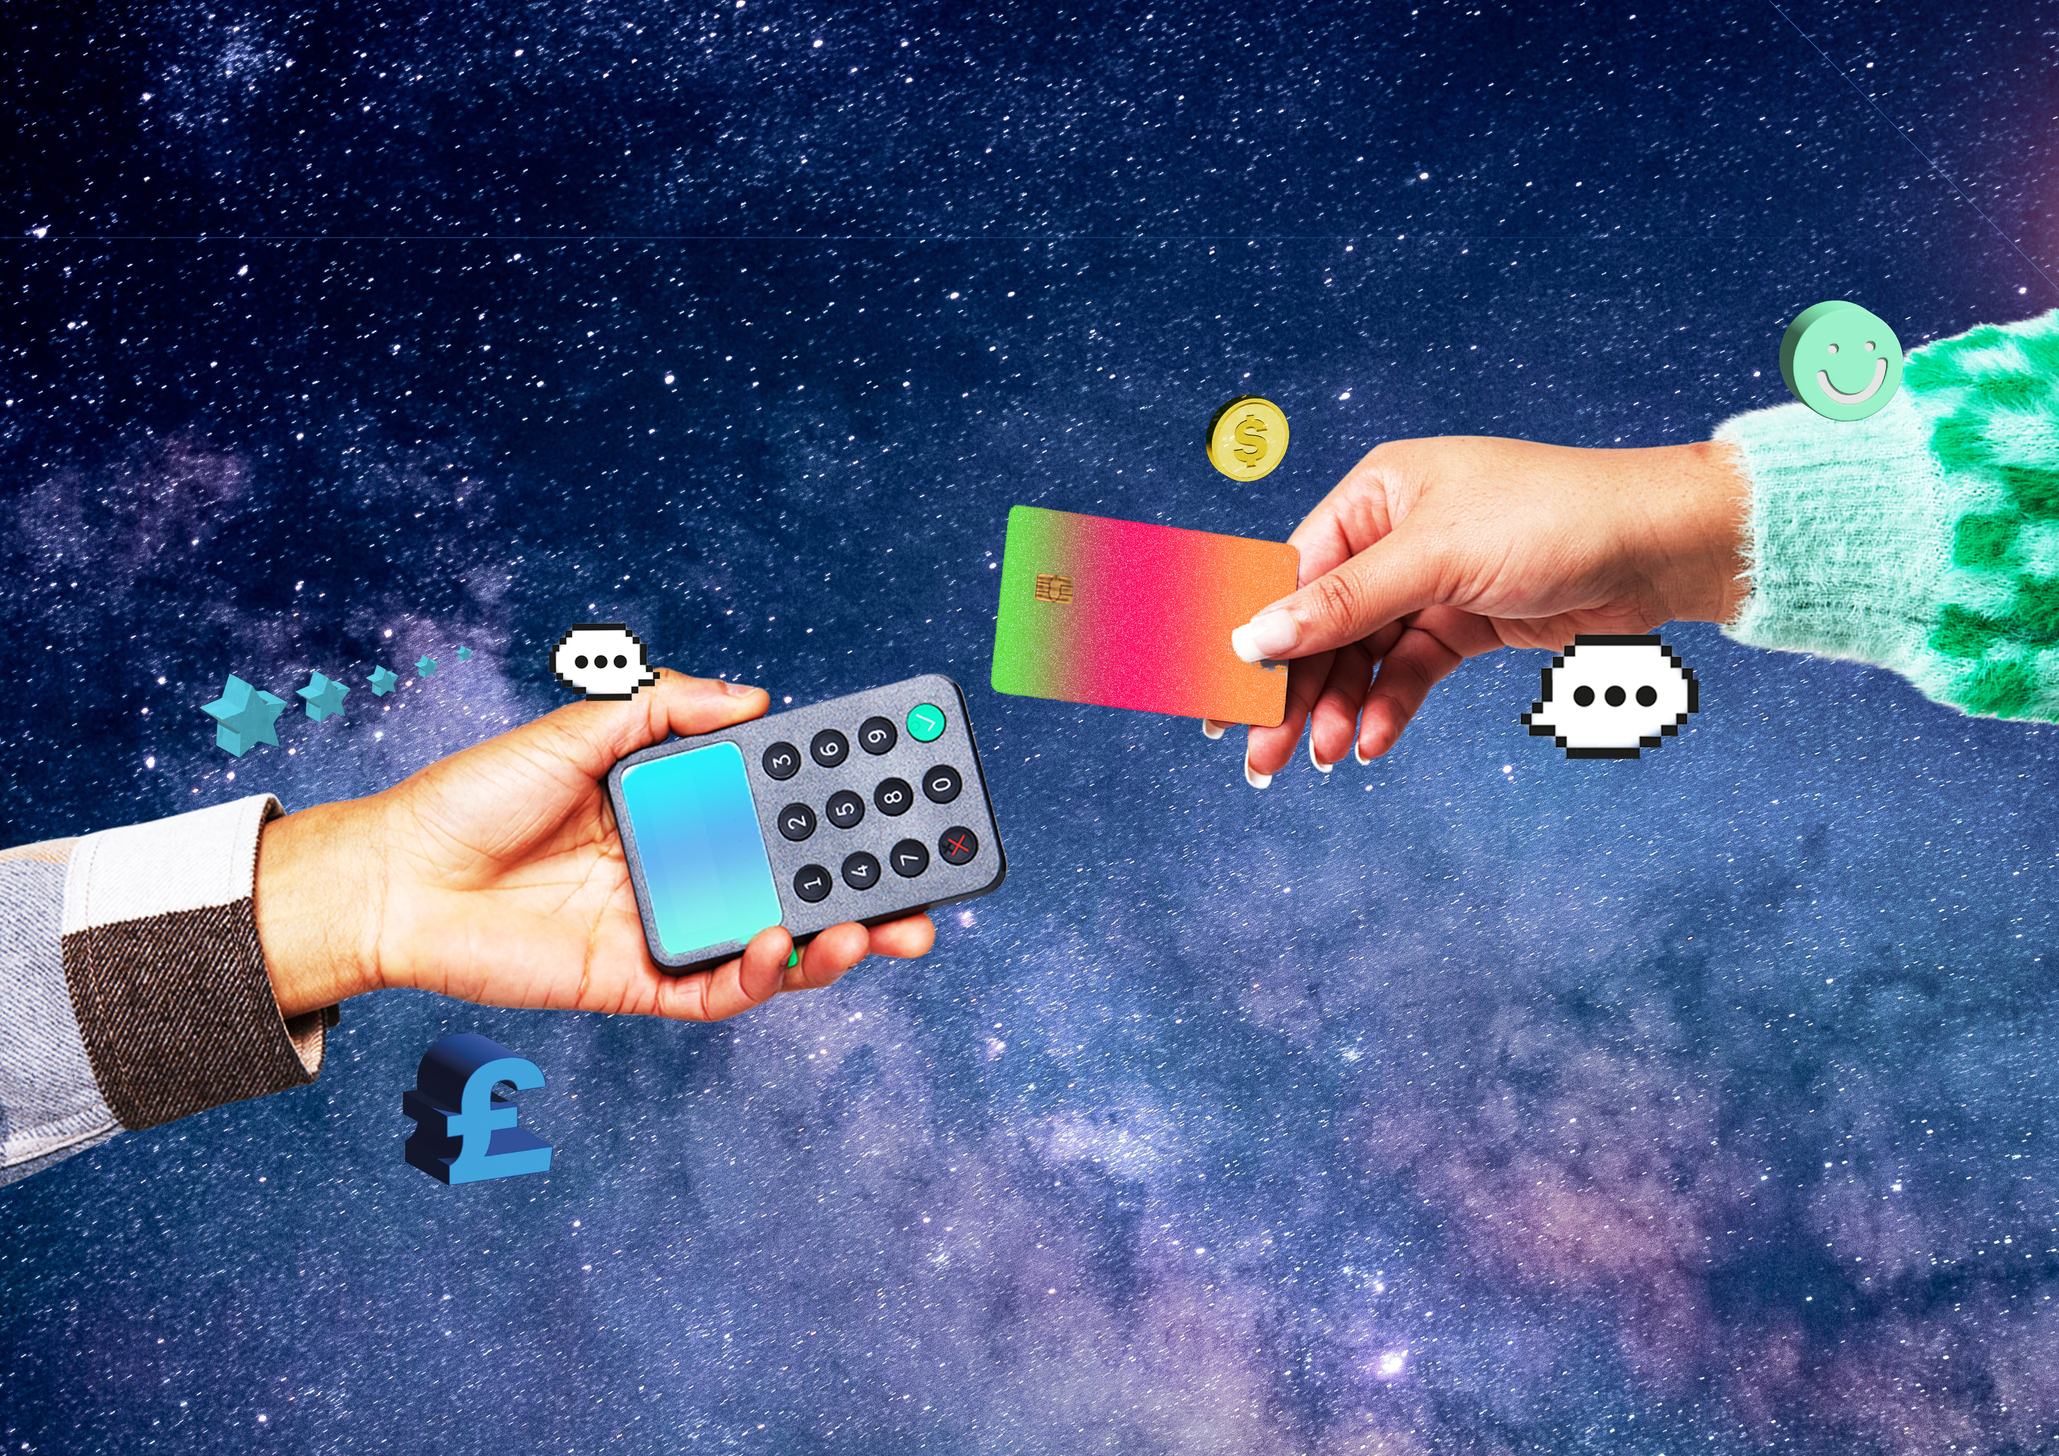 Illustration of two hands exchanging a credit card and phone with various currency symbols against a starry background